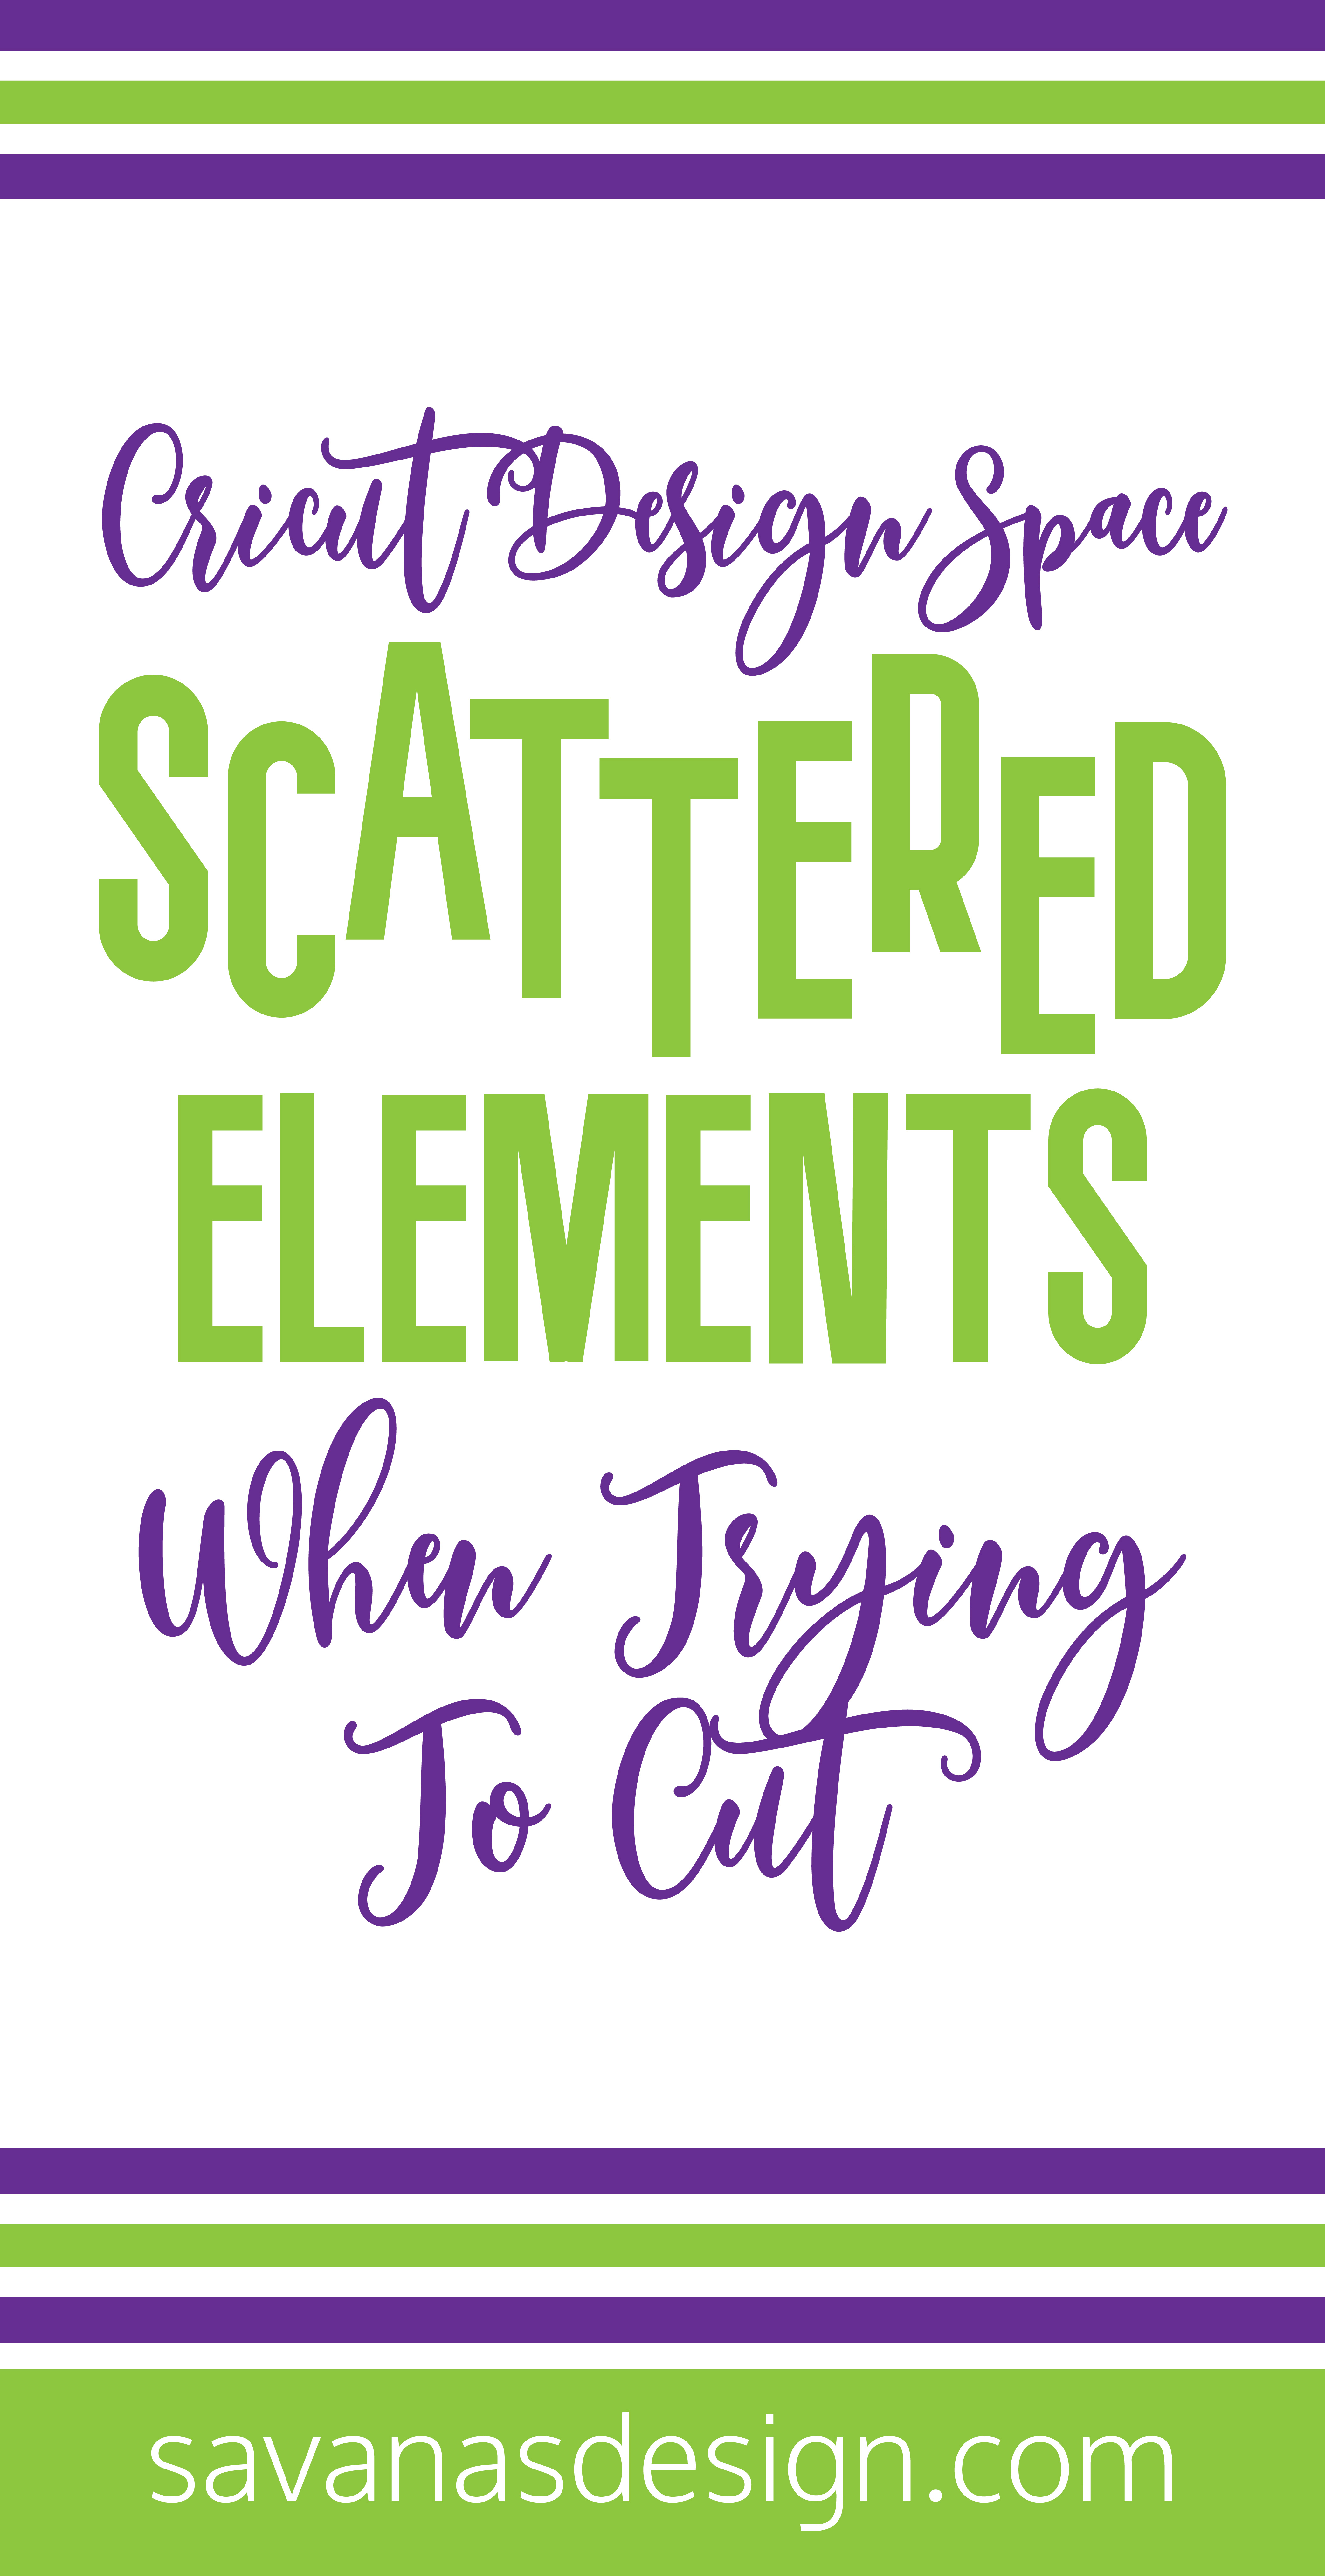 Scattered Elements When Trying to Cut Pinterest